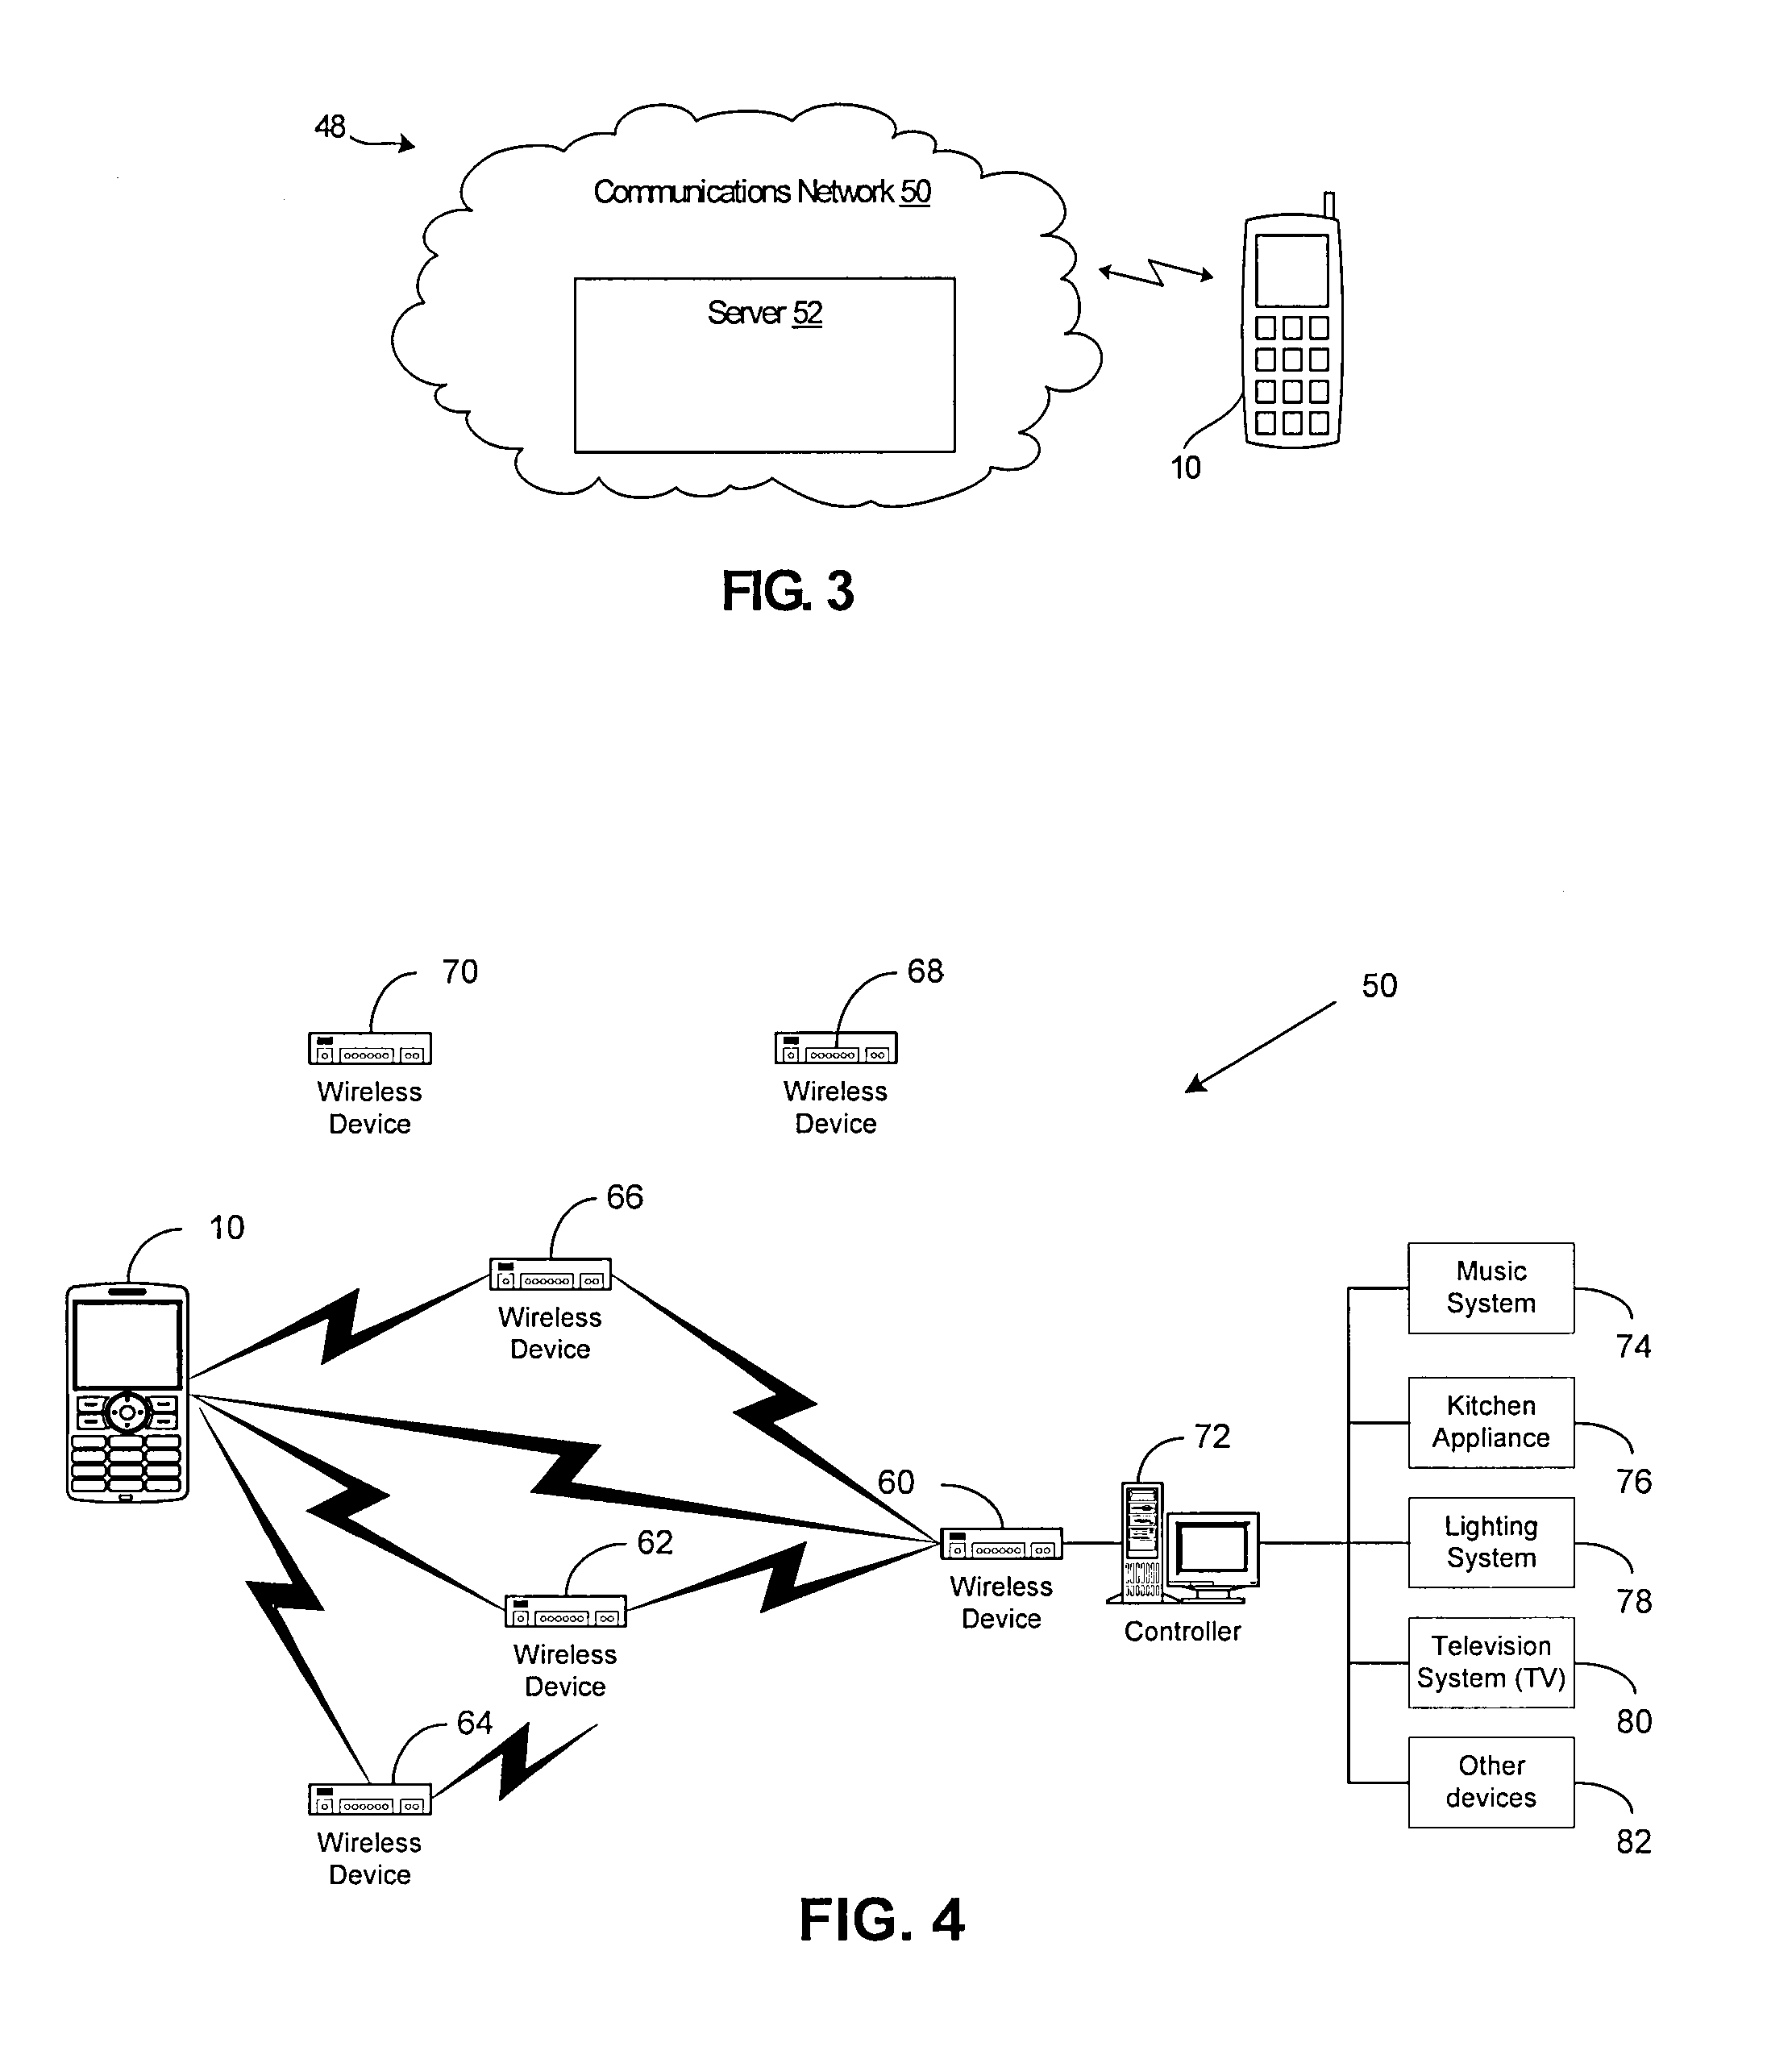 User interface for an electronic device used as a home controller